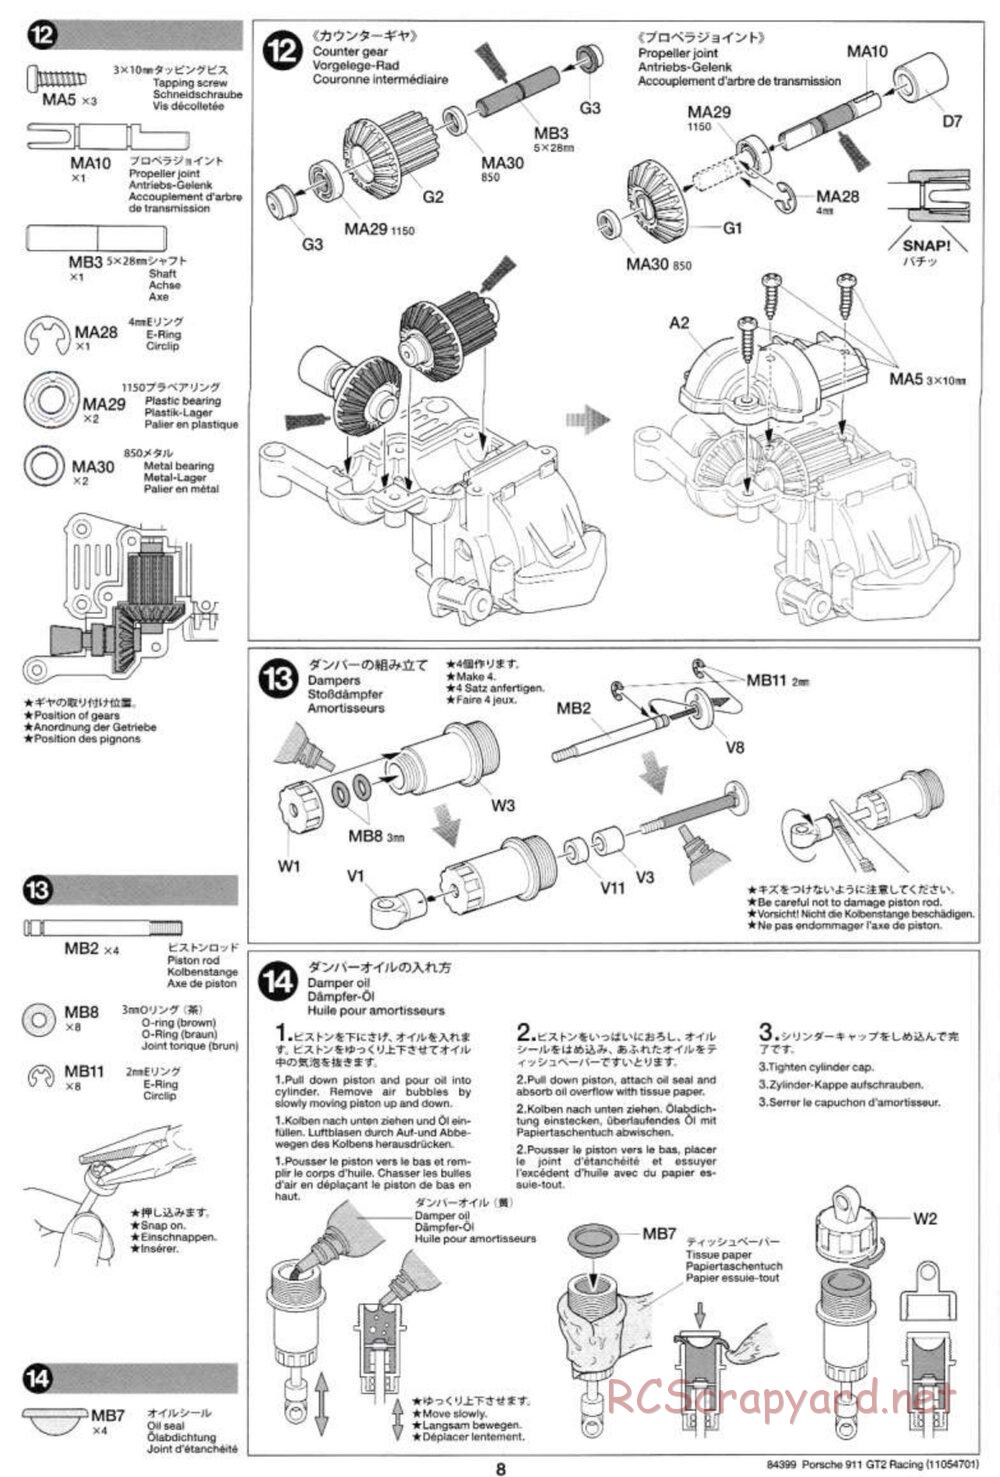 Tamiya - Porsche 911 GT2 Racing - TA-02SW Chassis - Manual - Page 8